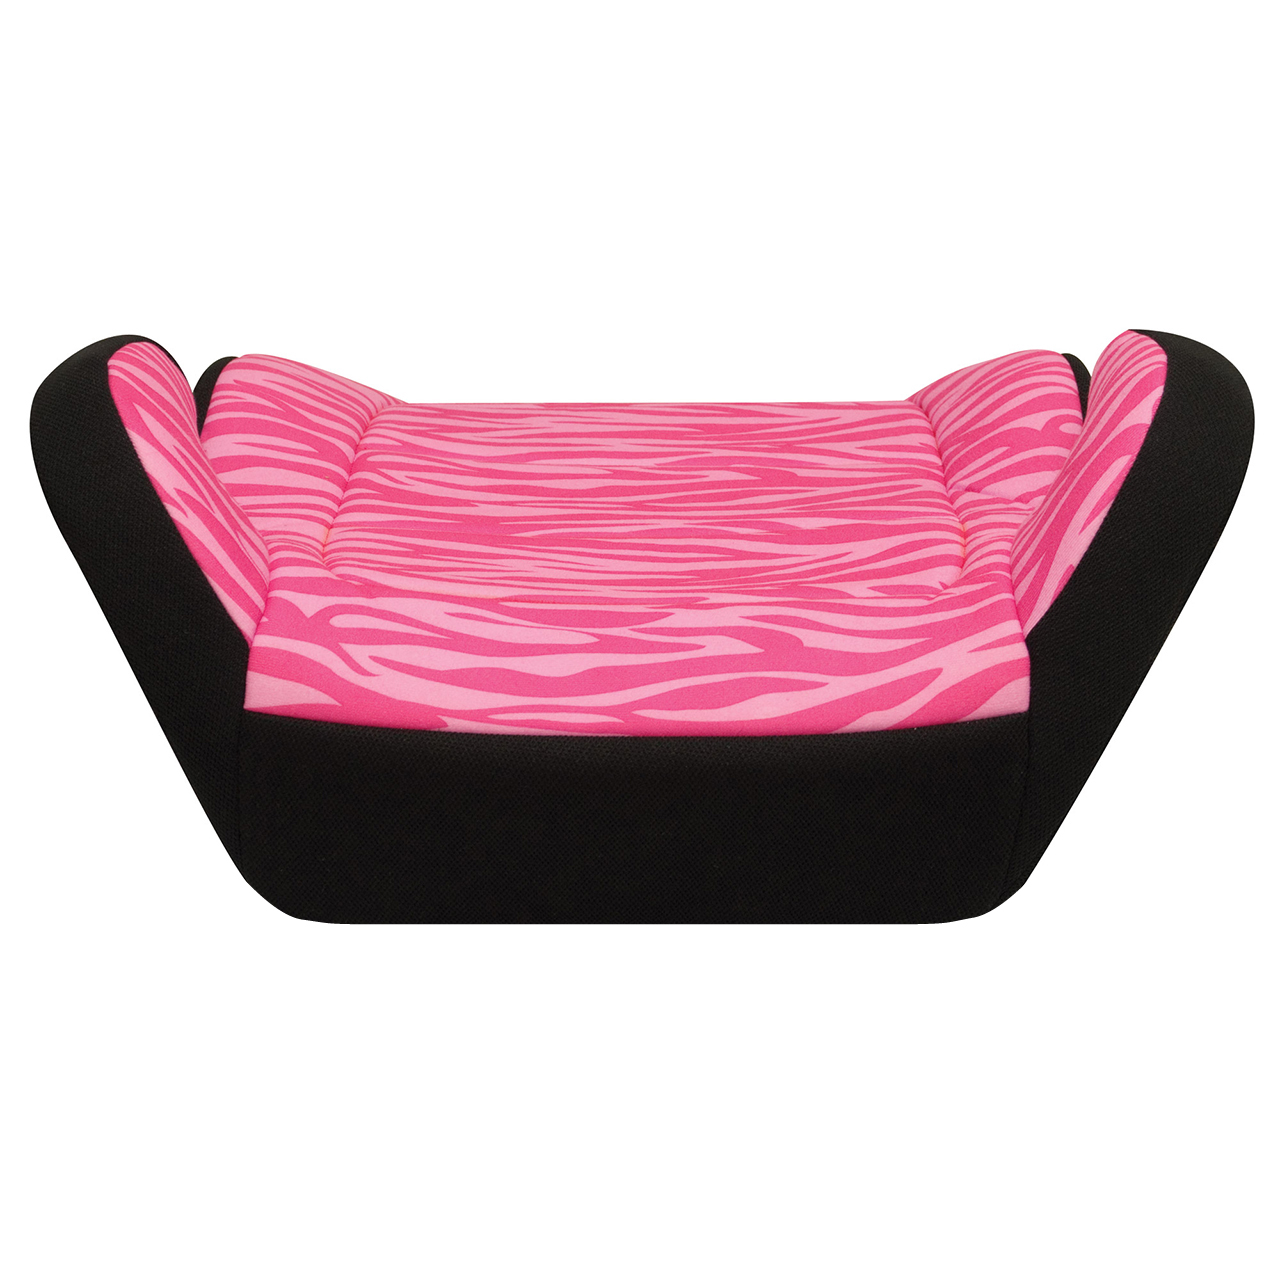 Harmony Juvenile Youth Backless Booster Car Seat, Pink Zebra - image 4 of 7